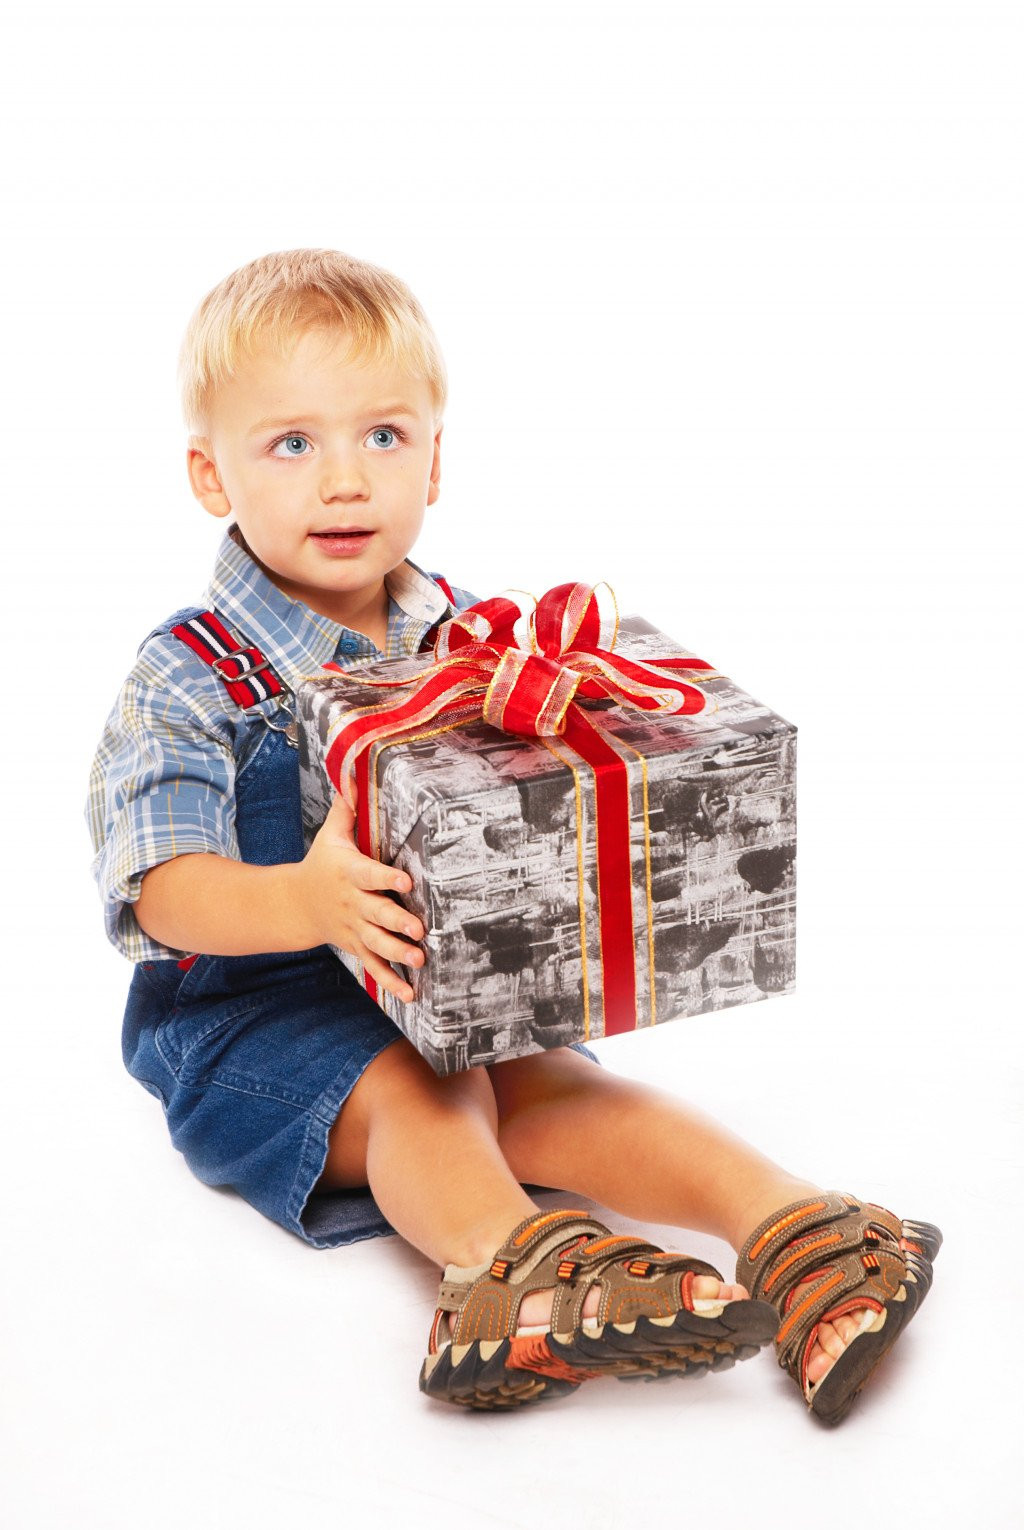 3 Year Old Boy Birthday Gift Ideas
 Best Birthday and Christmas Gift Ideas for a Three Year